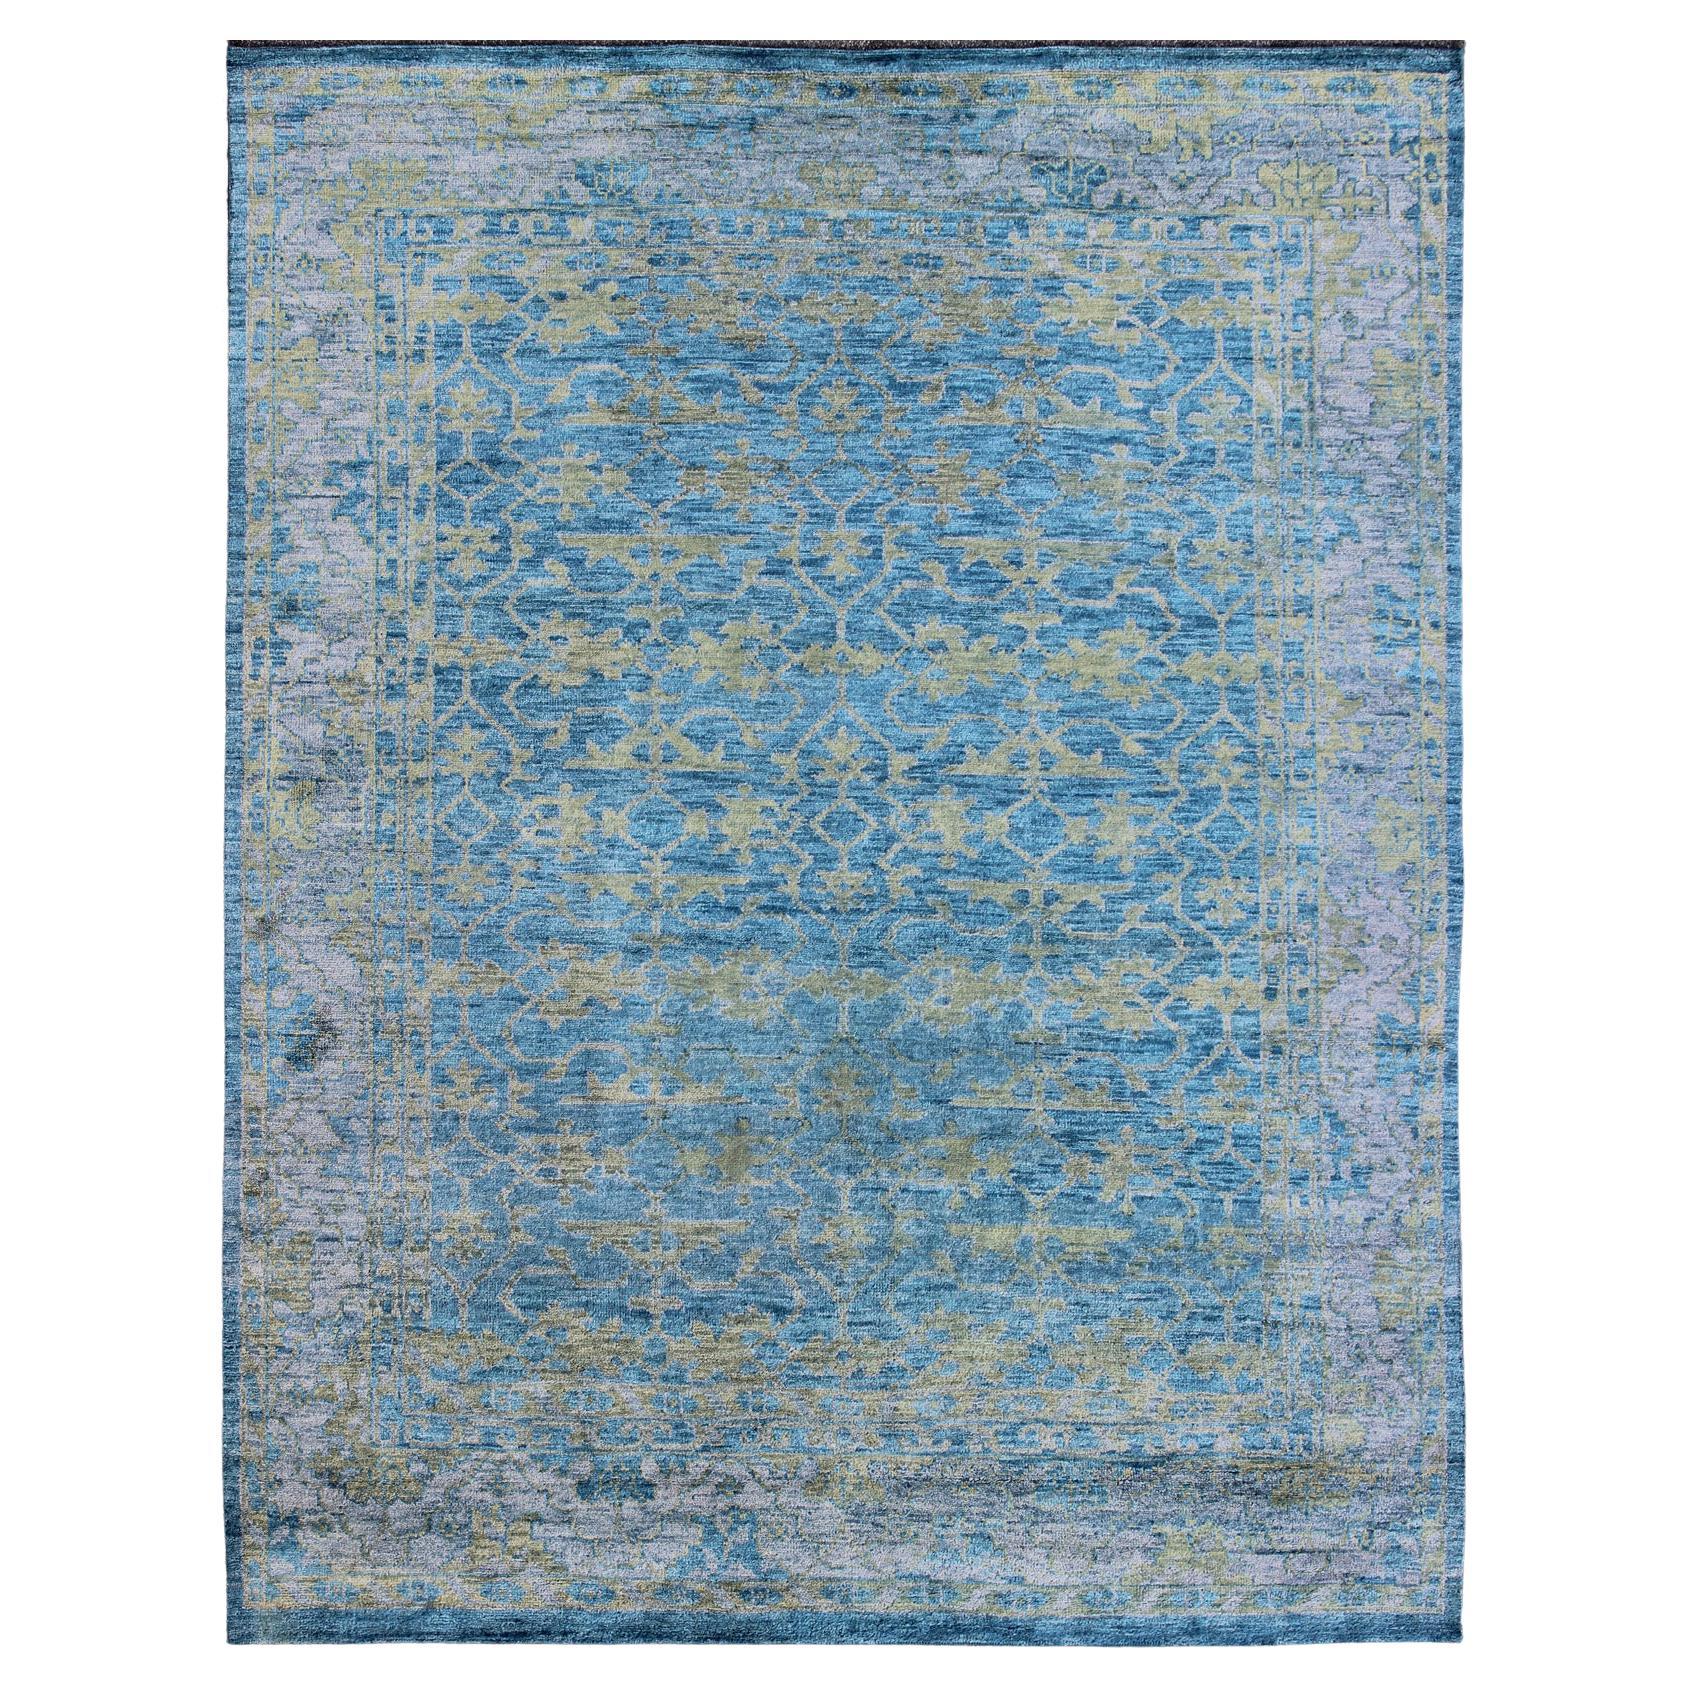 Large Oushak Contemporary Rug in Blue, Silver Gray/Lavender & Yellow Green